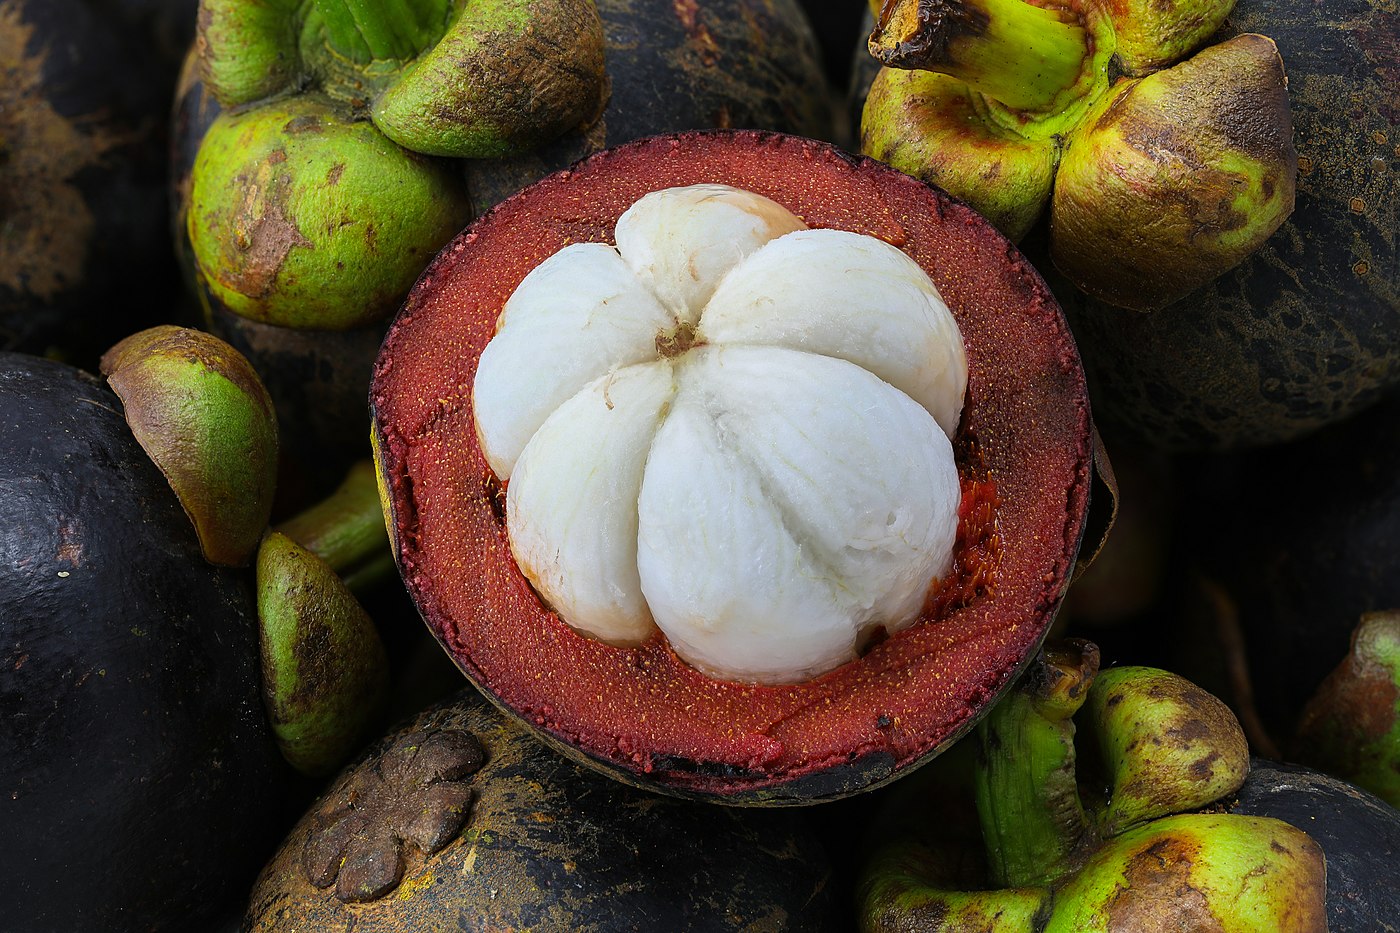 Purple mangosteen, sweet, tangy and juicy fruit